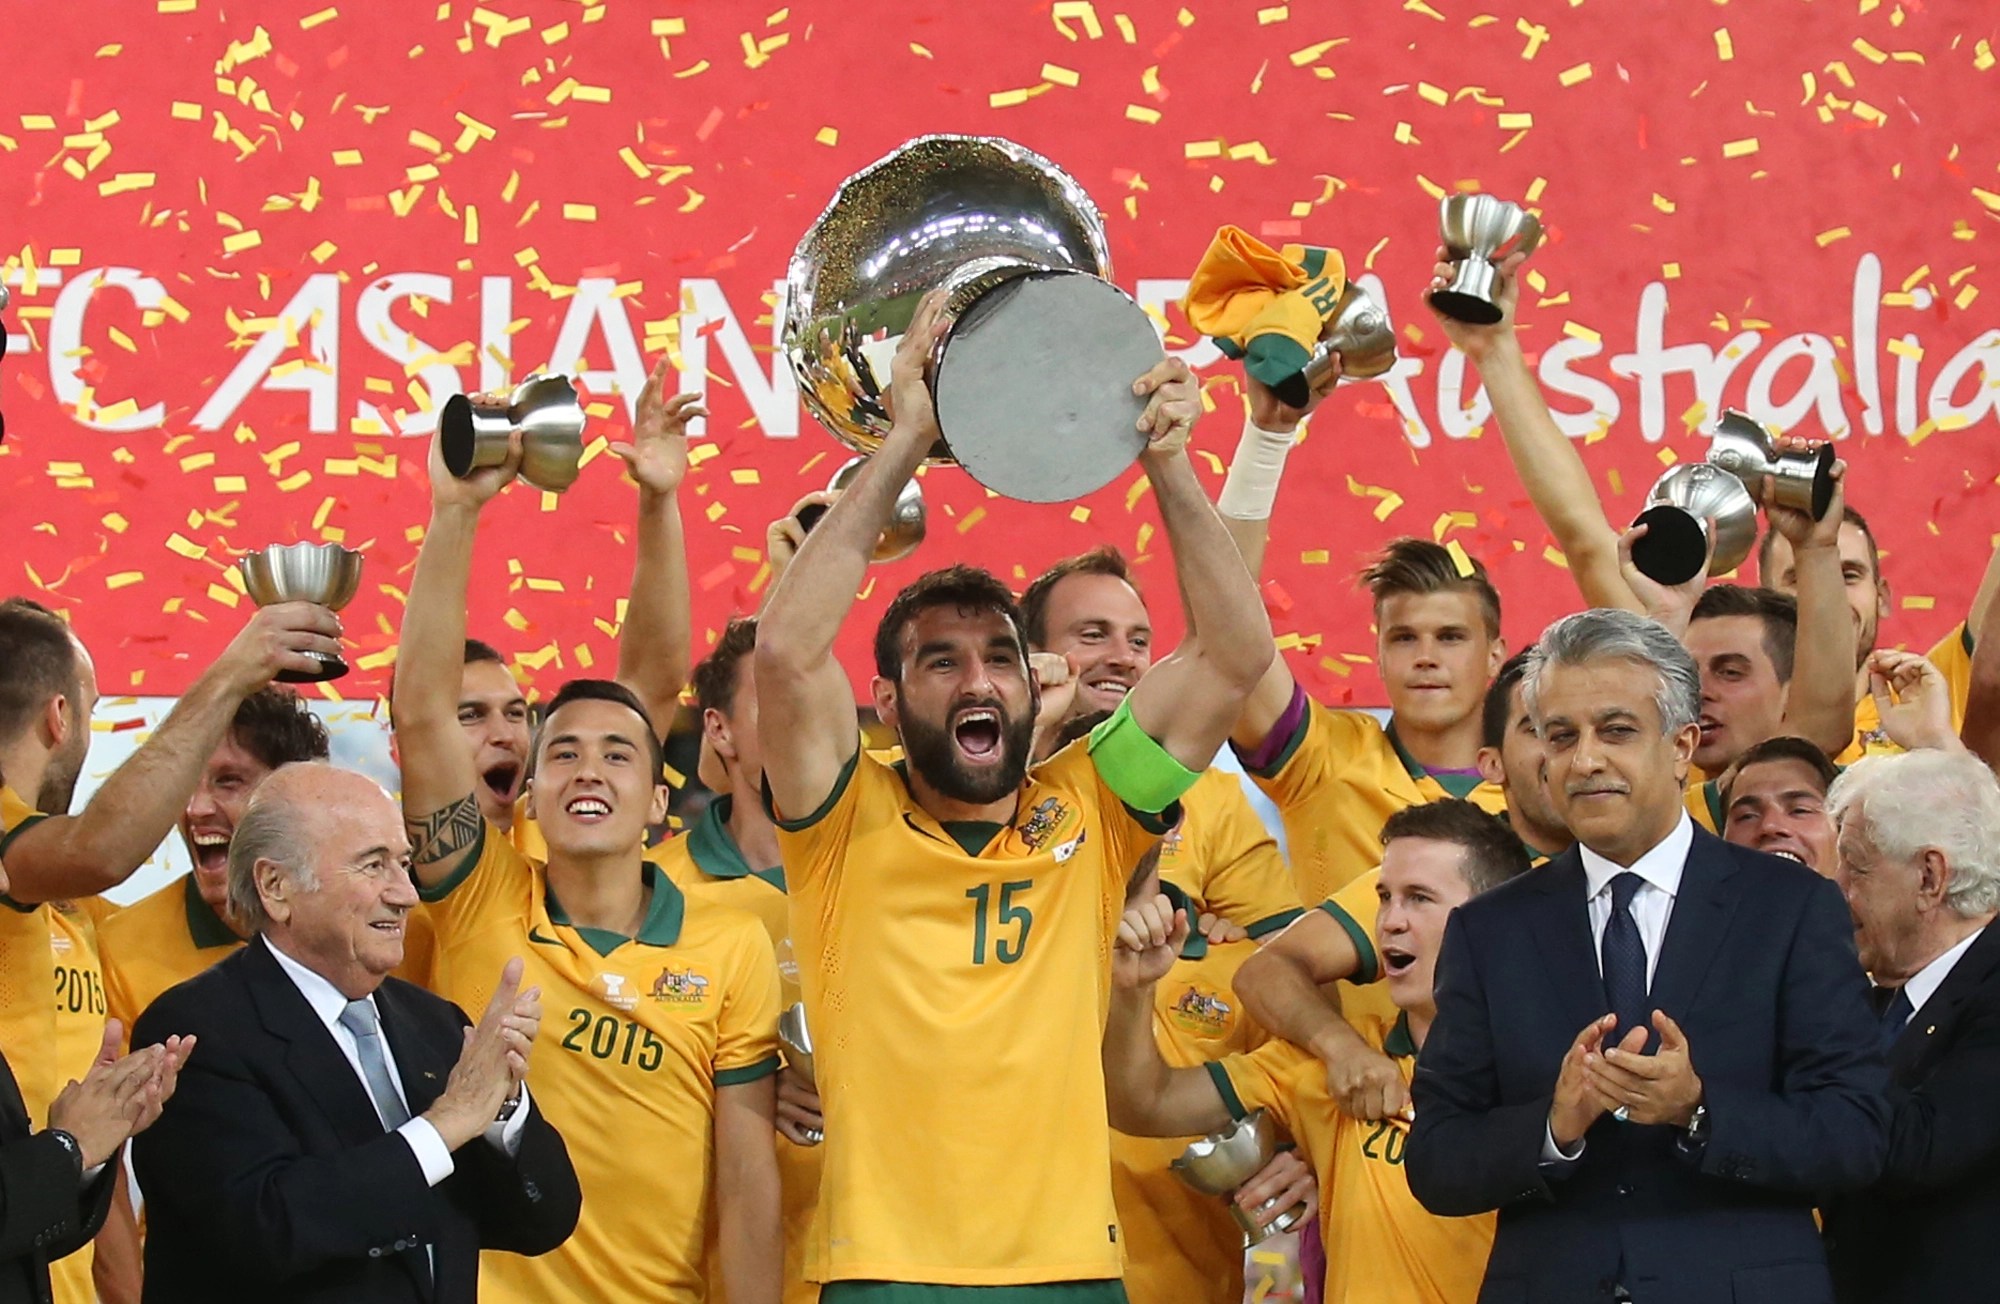 AFC Asian Cup 2023: Australia considering a bid to host 2023 Asian Cup after China withdrew the hosting rights - Check out